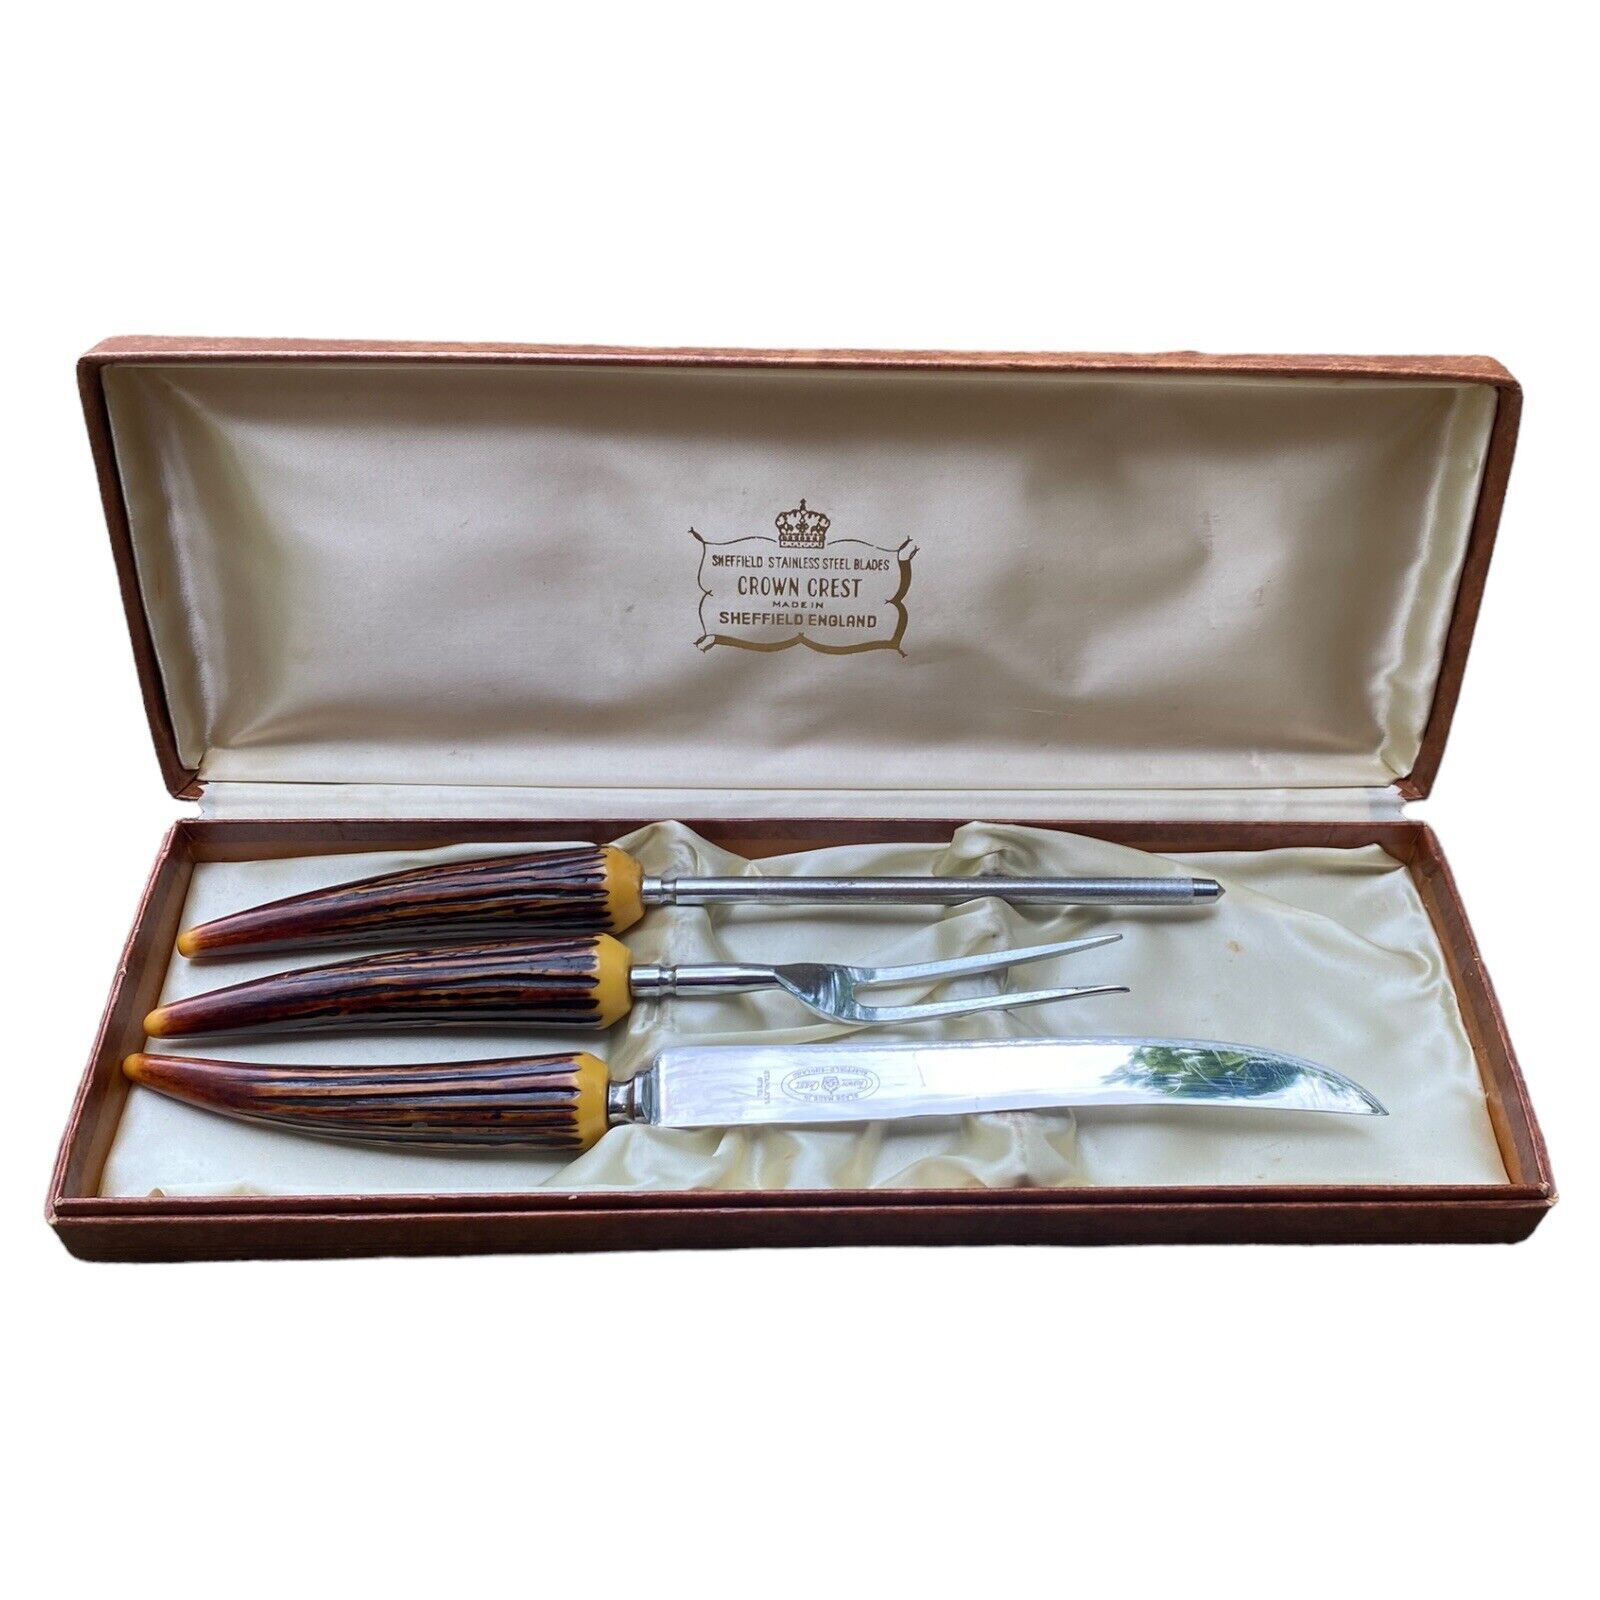 VTG Crown Crest Sheffield England Carving Set Faux Antler Stainless Steel 3 Pc